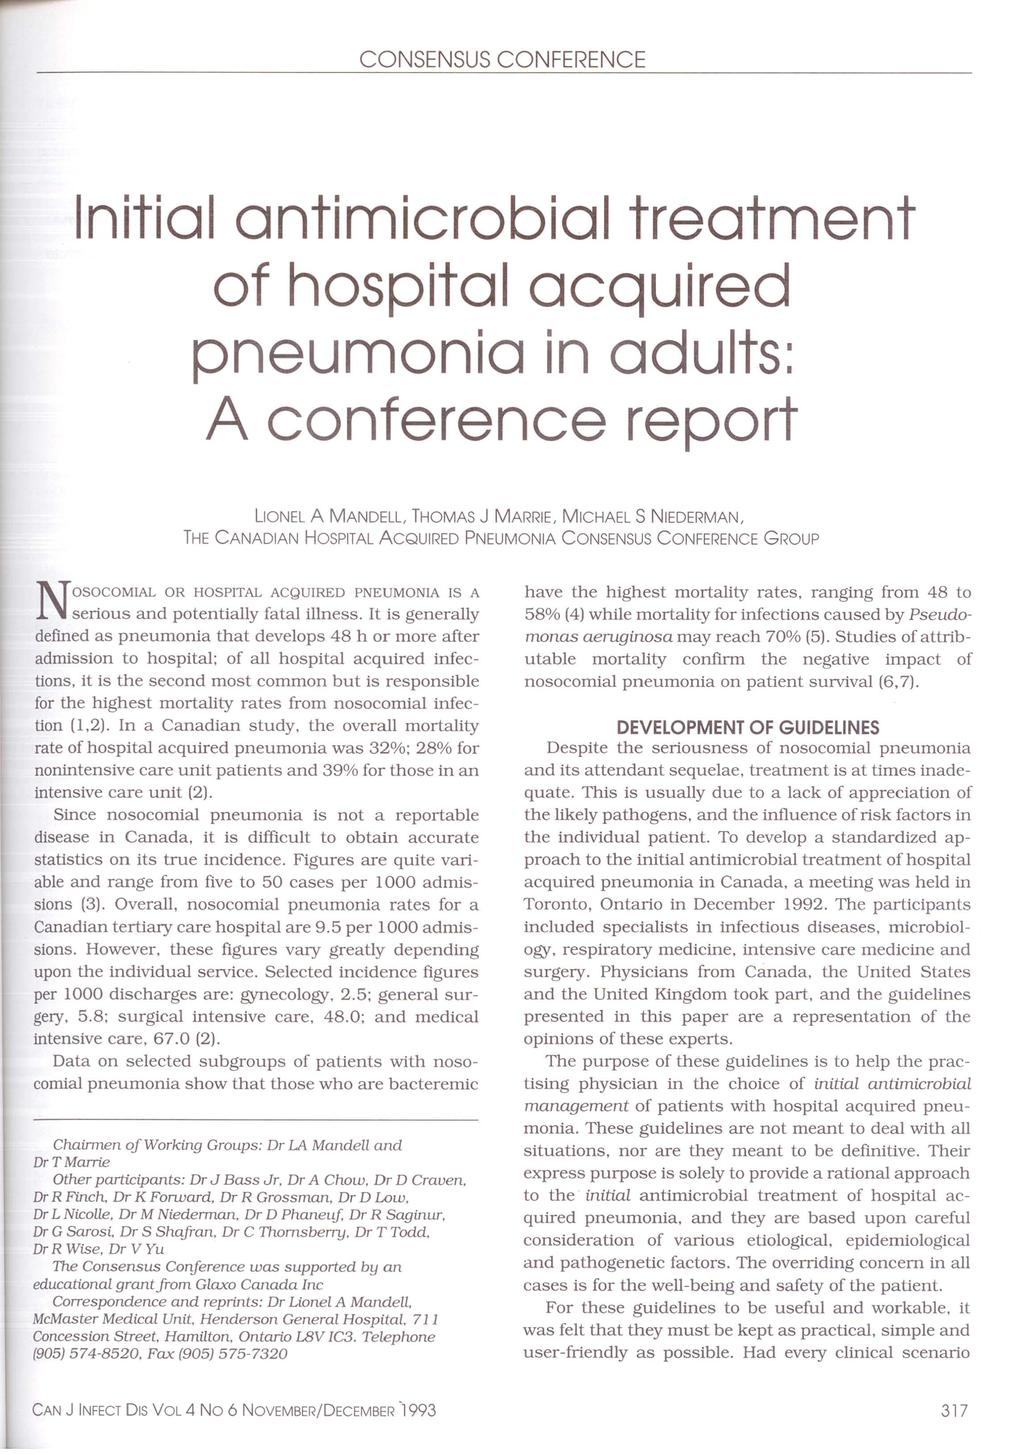 CONSENSUS CONFERENCE Initial antimicrobial treatment of hospital acquired pneumonia in adults: A conference report LIONEL A MANDELL, THOMAS J MARRIE, MICHAELS NIEDERMAN, THE CANADIAN HOSPITAL